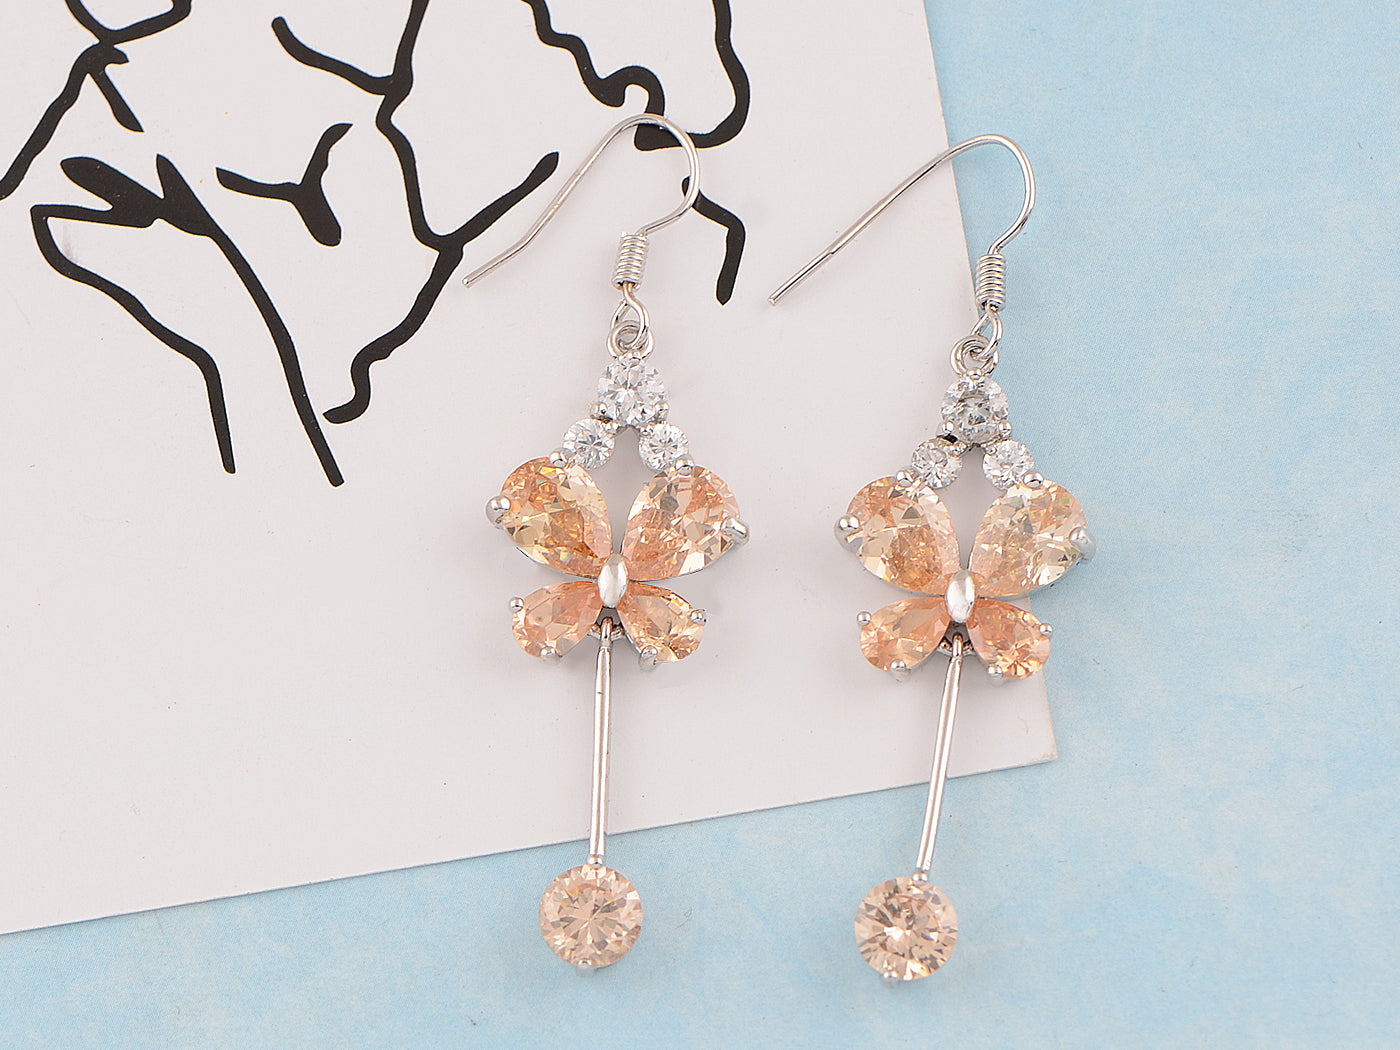 Swarovski Crystal Element Silver Topaz Colored Butterfly Insect Dangle Earrings